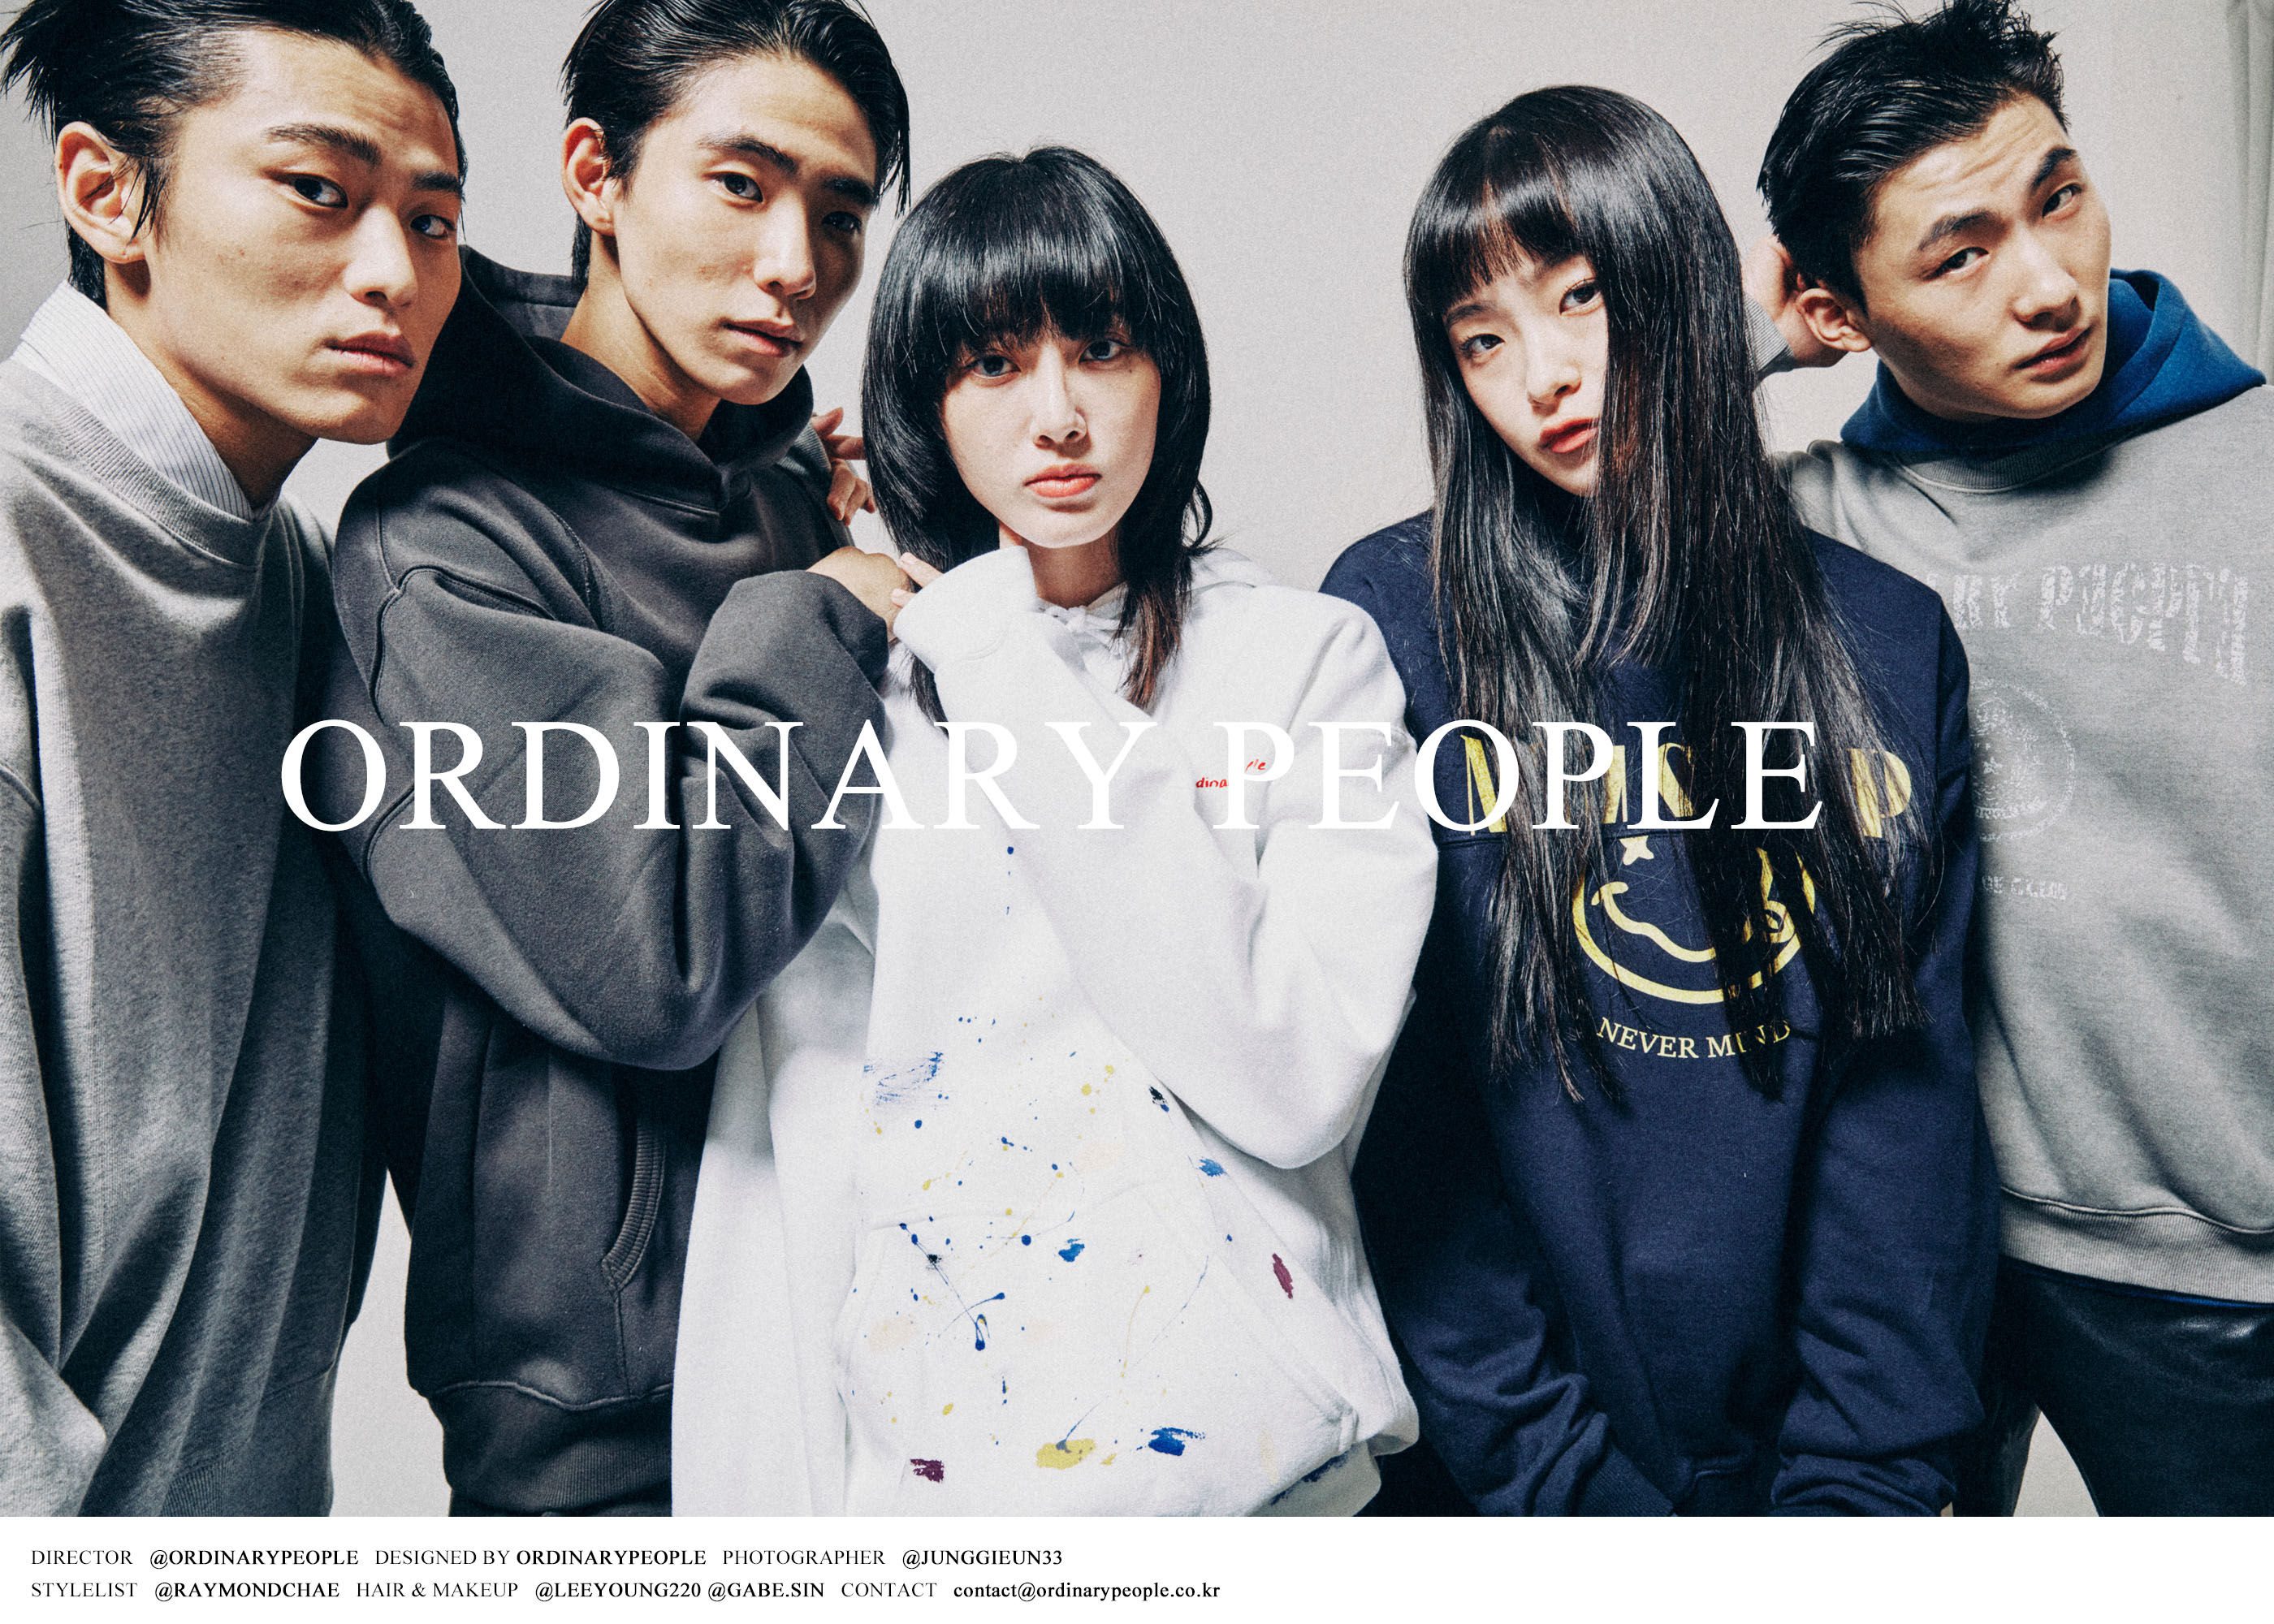 ordinary images #2 from : https://www.ordinarypeople.co.kr/web/product/big/202108/0452ac56f29000e58d7988bc31fa0b36.jpg